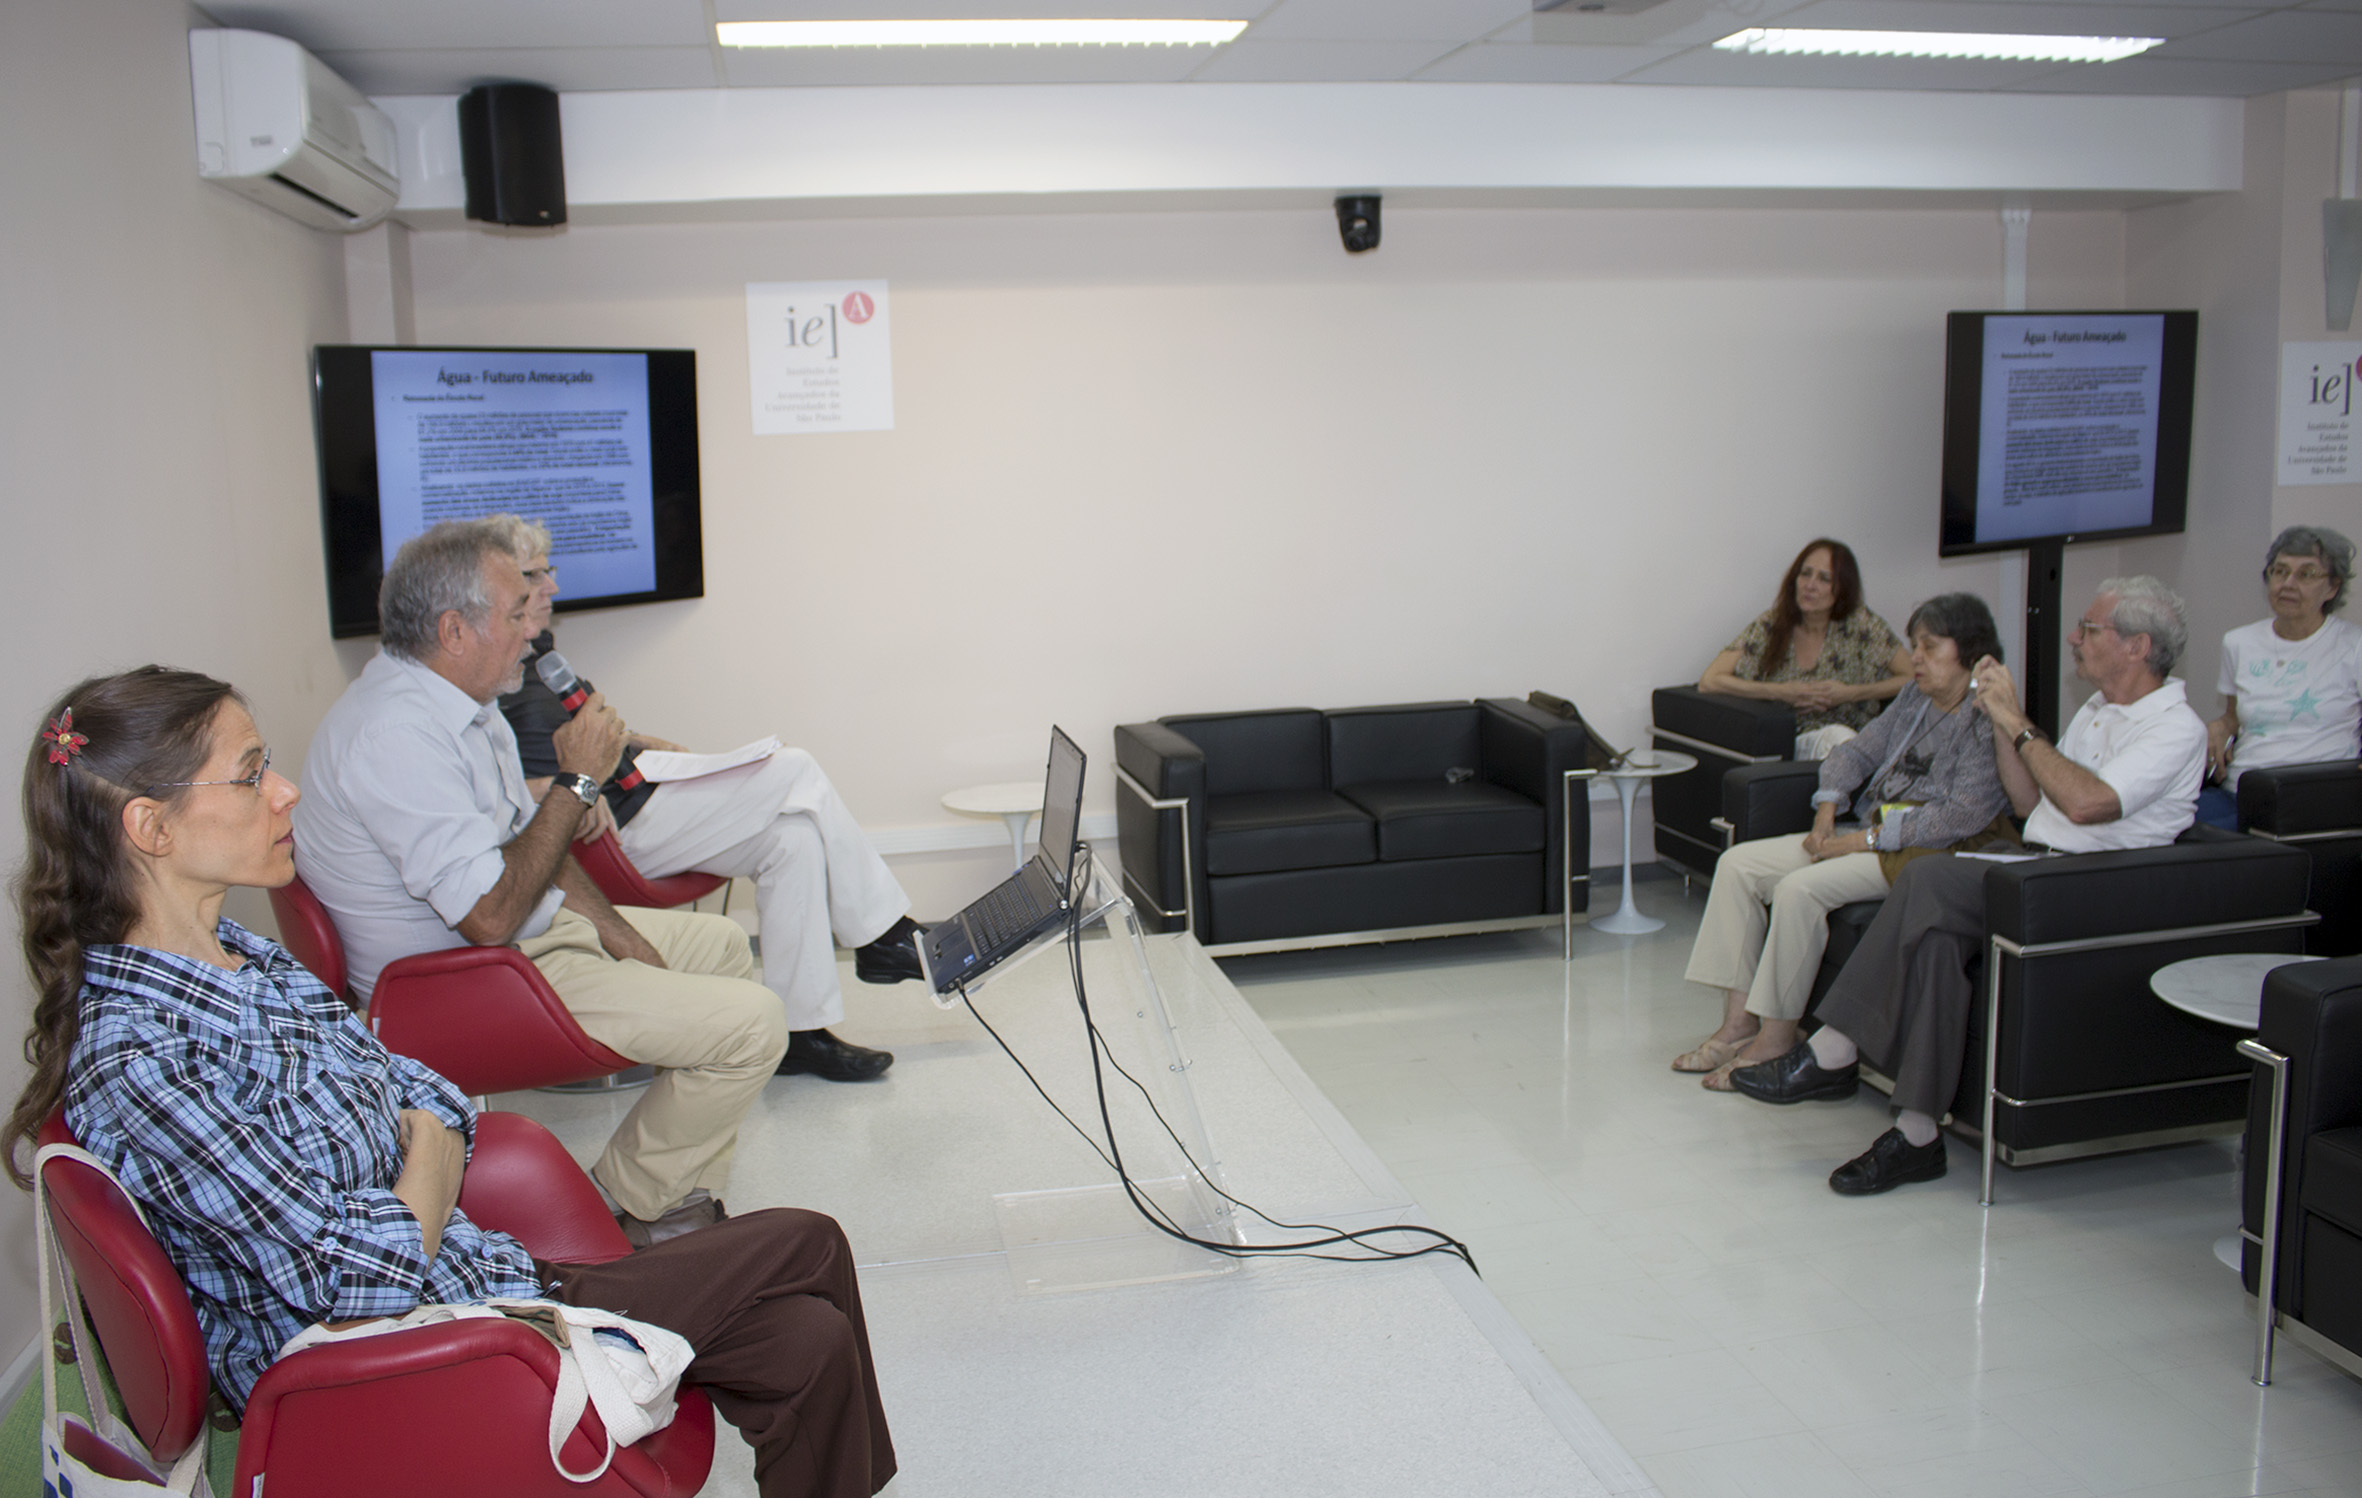 Suzana Prizendt, Marcio Automare and Pedro Jacobi in a debate with an audience member